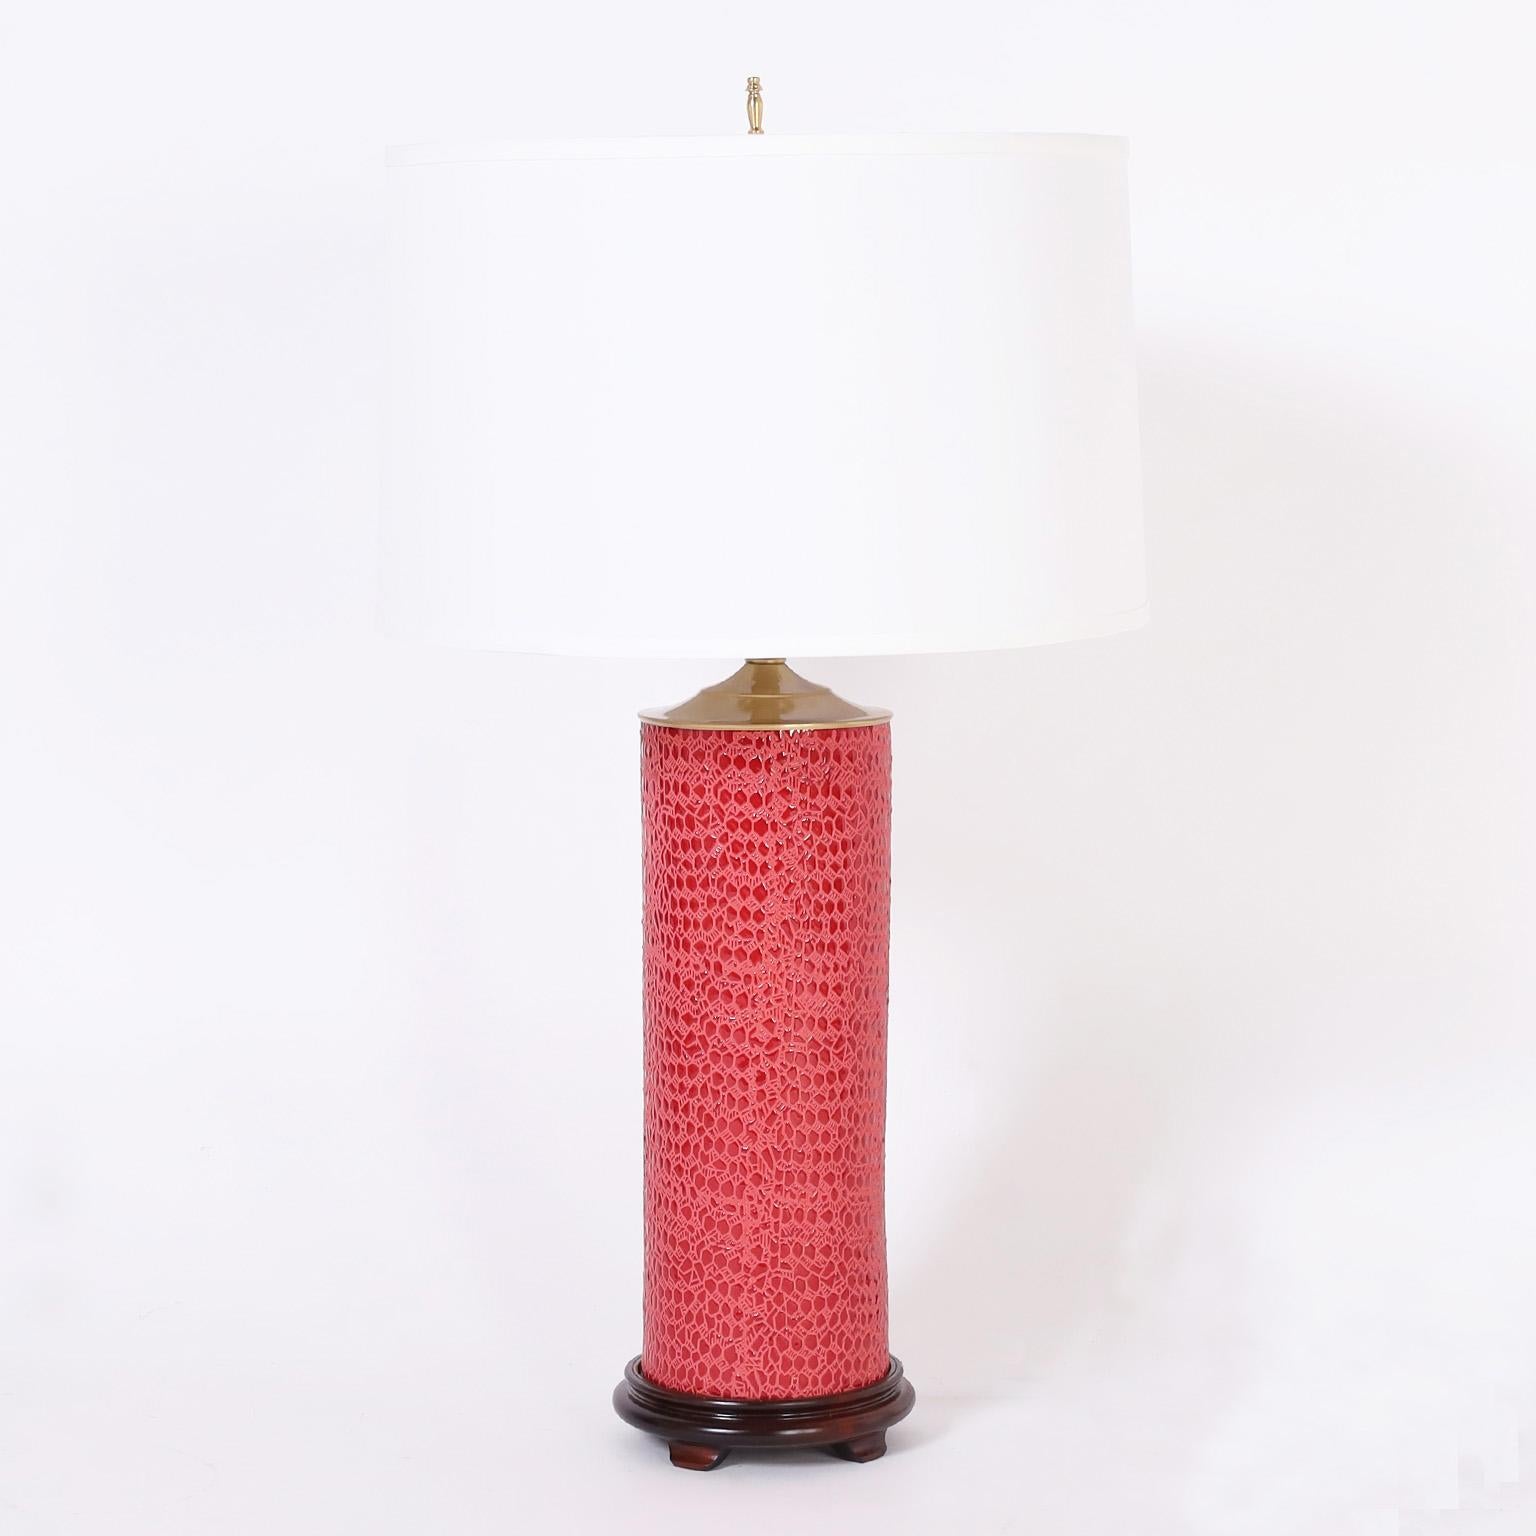 Striking pair of vintage table lamps crafted in ceramic or porcelain with a faux red leather alligator finish presented on a wood base.